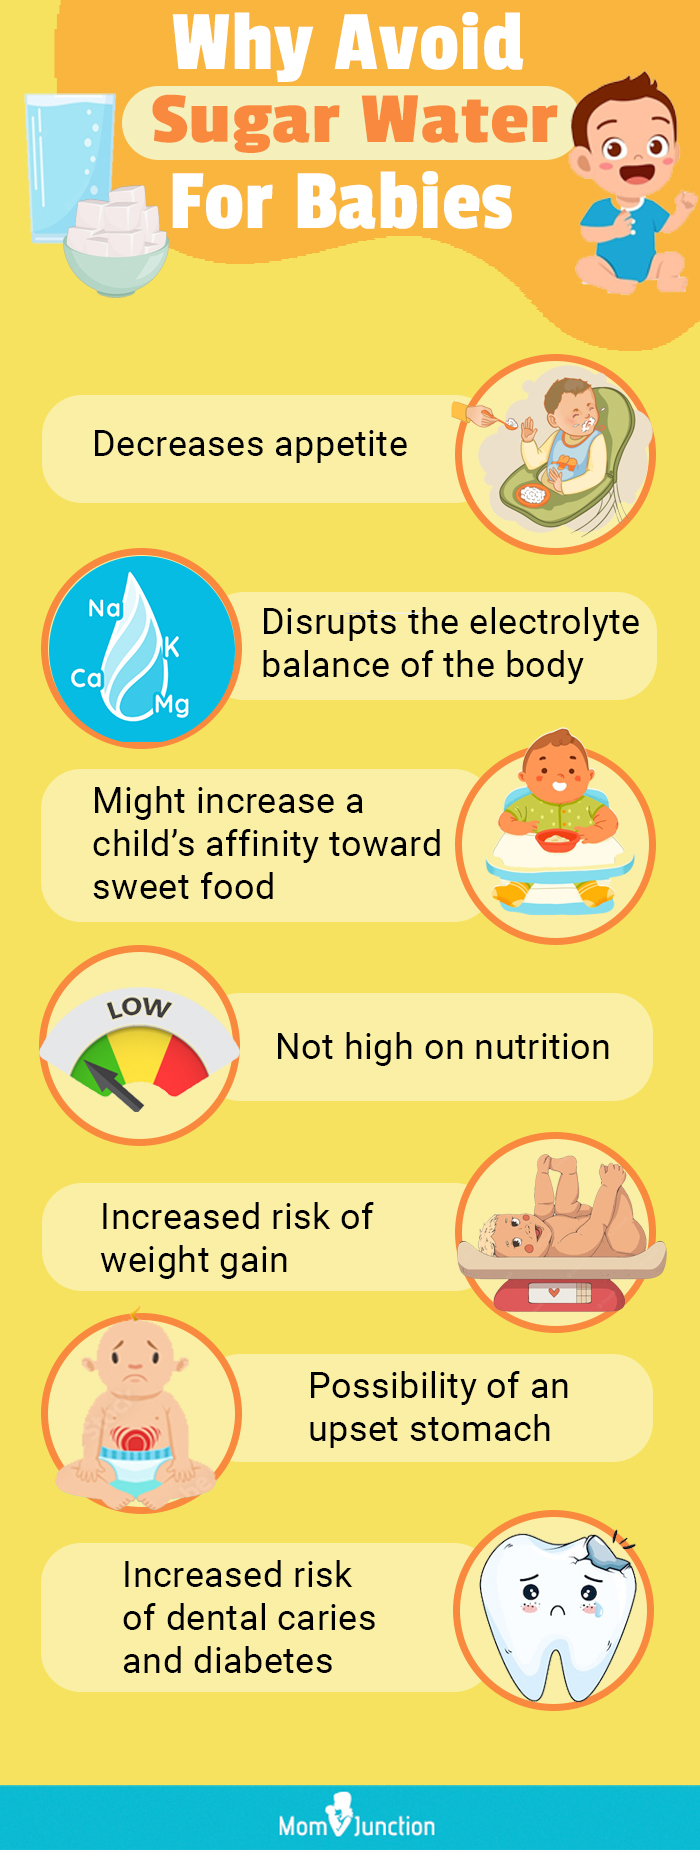 why avoid sugar water for babies [infographic]